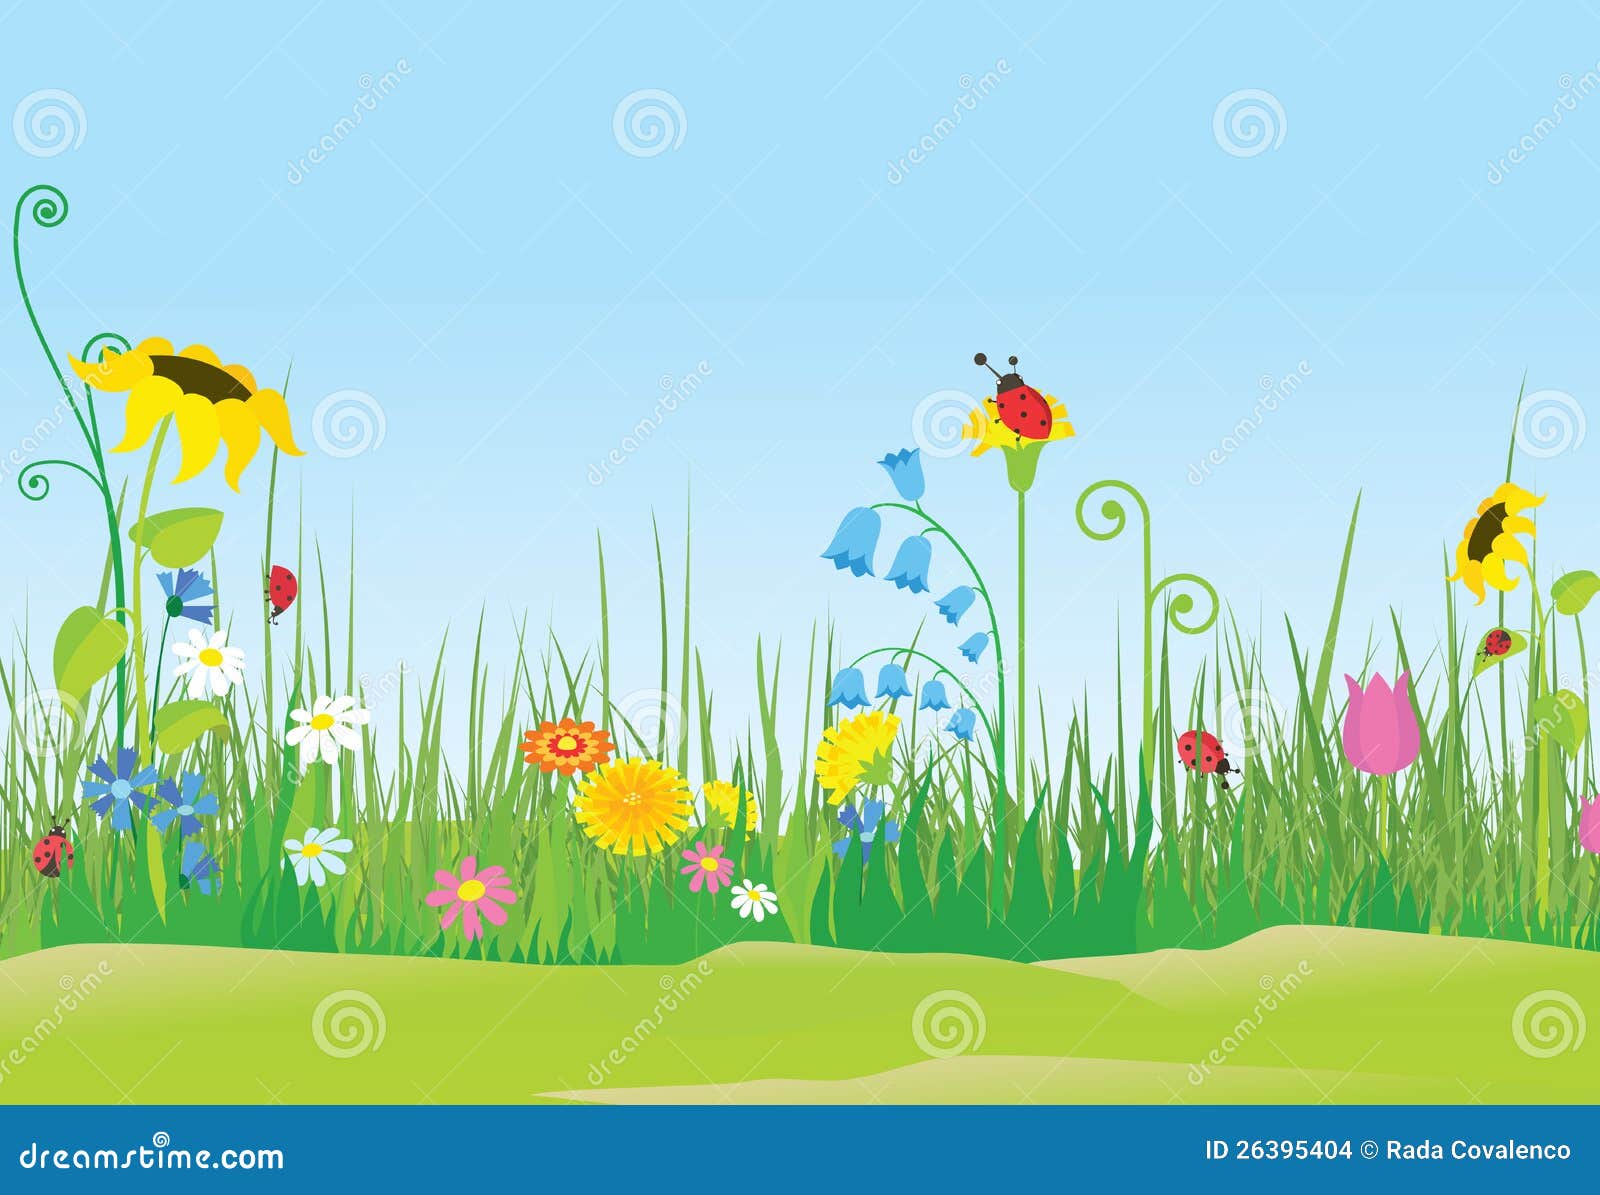 clipart meadow flowers - photo #15